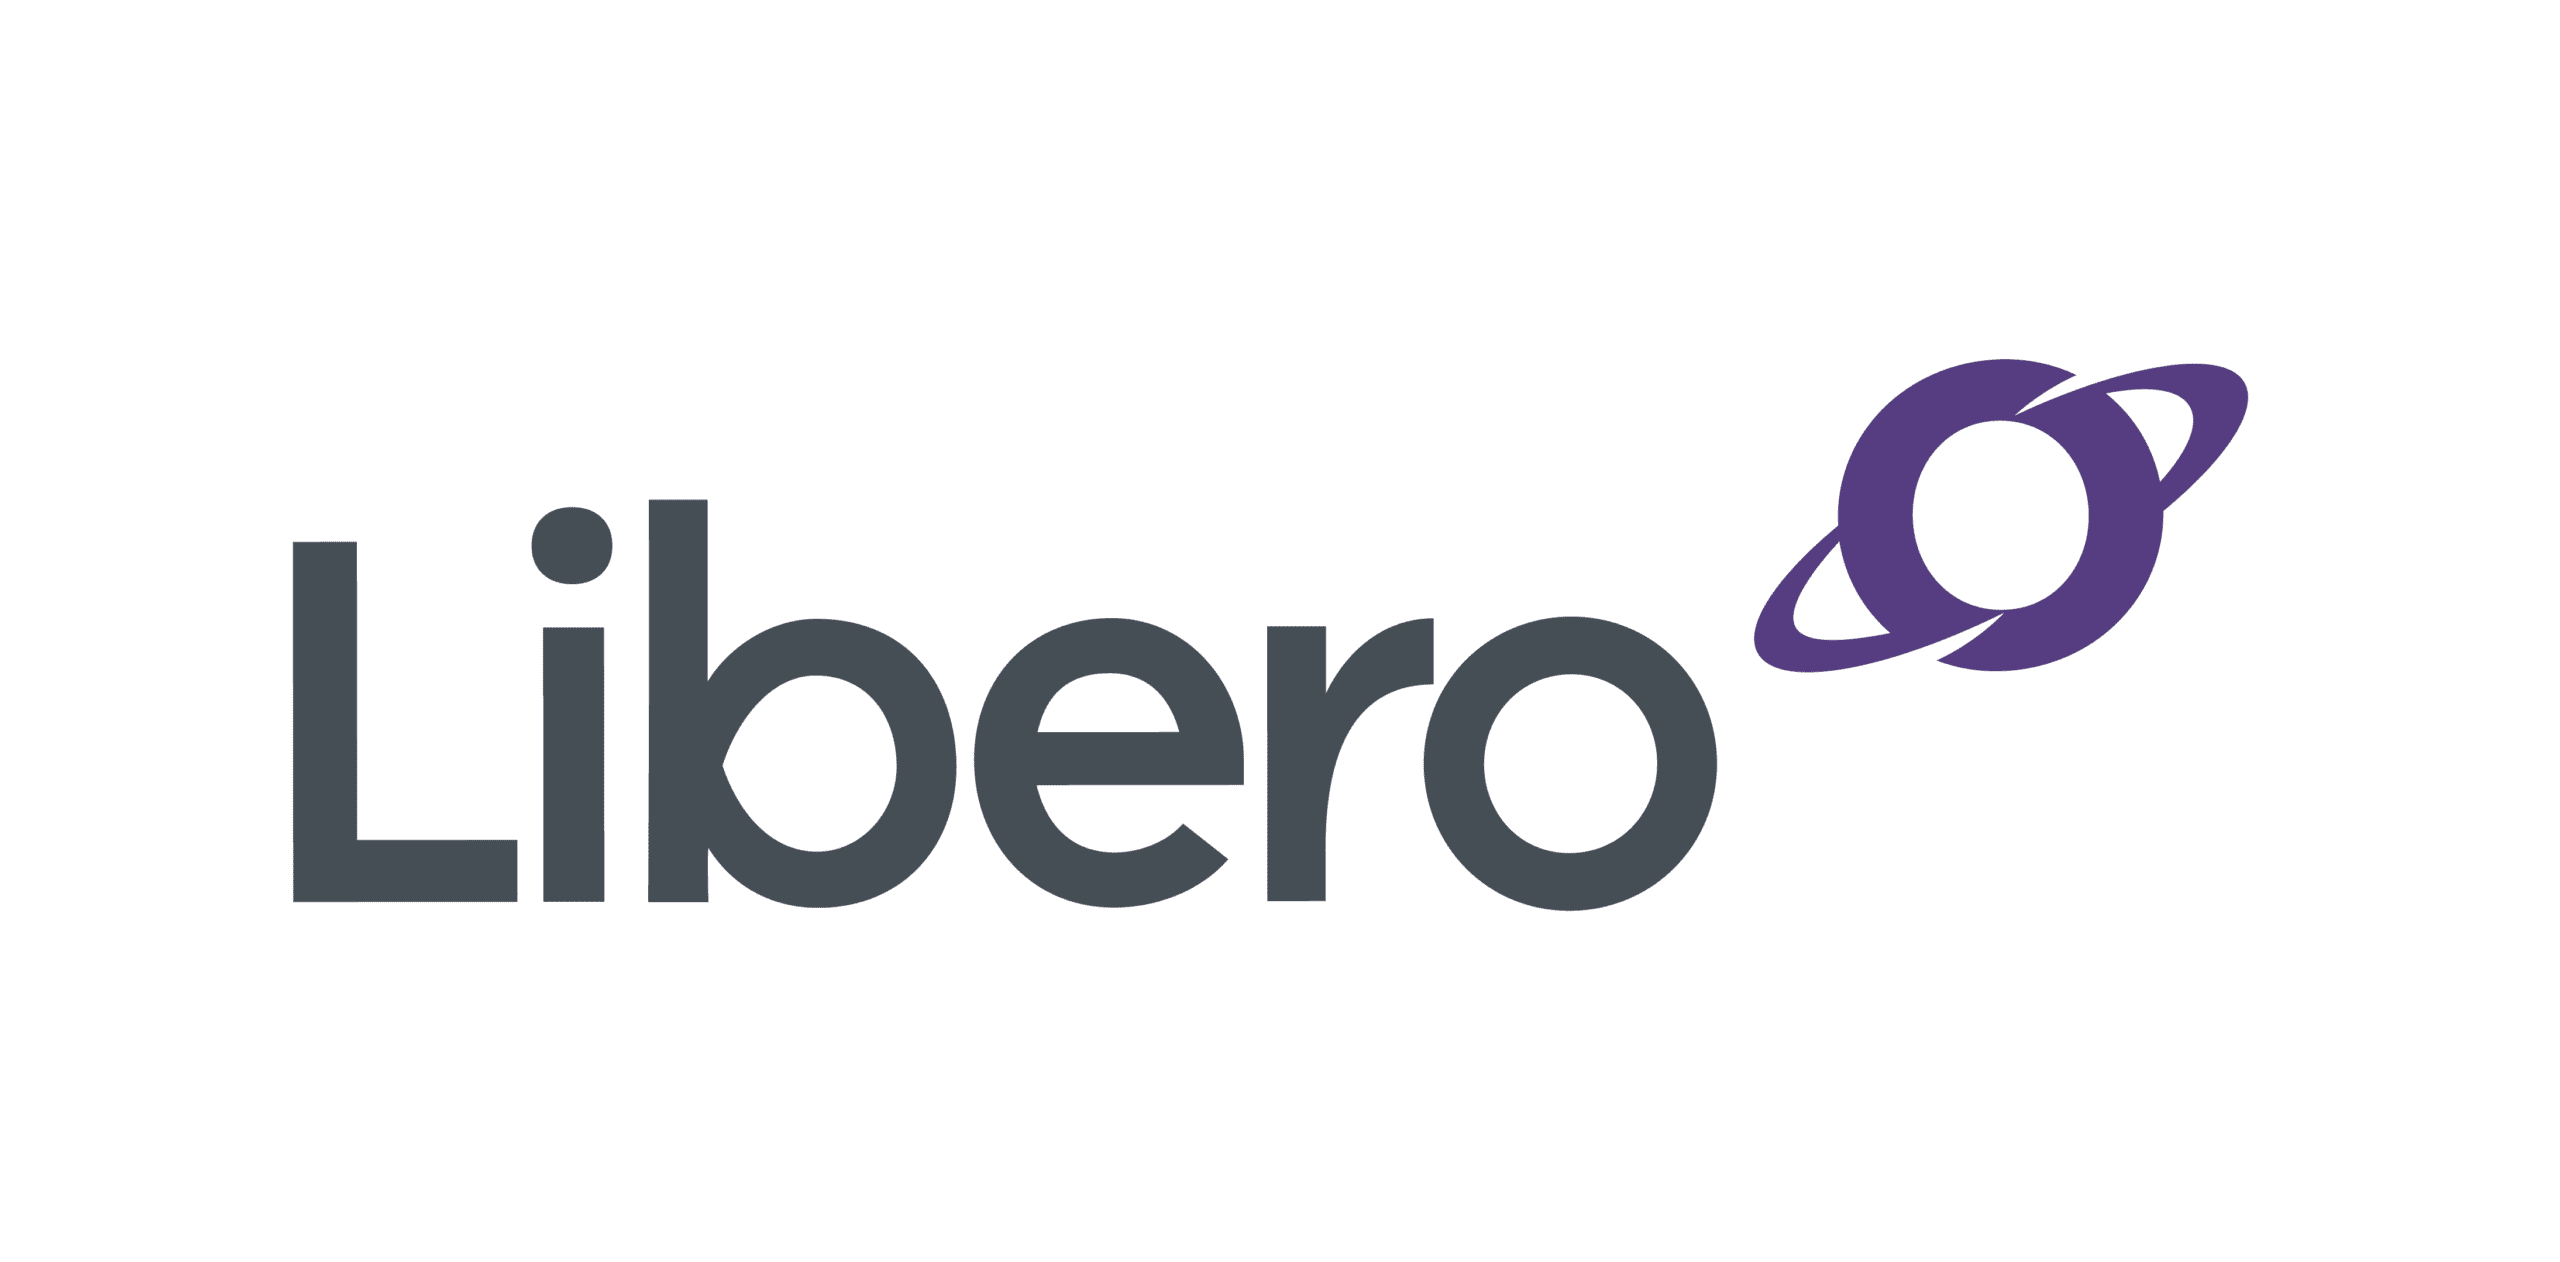 libero - a powerful library management system